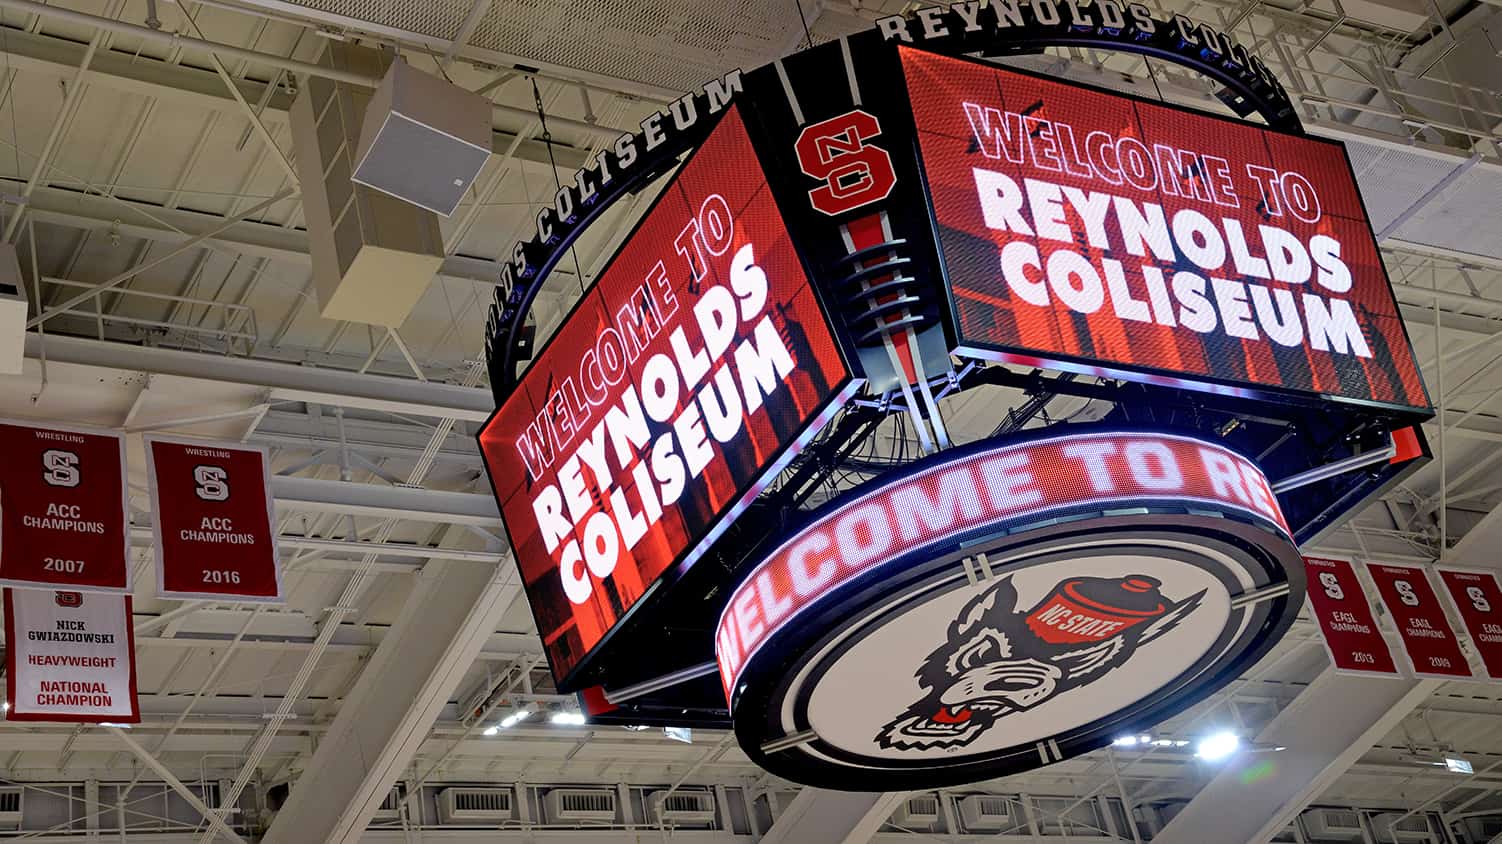 A jumbotron reads "Welcome to Reynolds Coliseum."